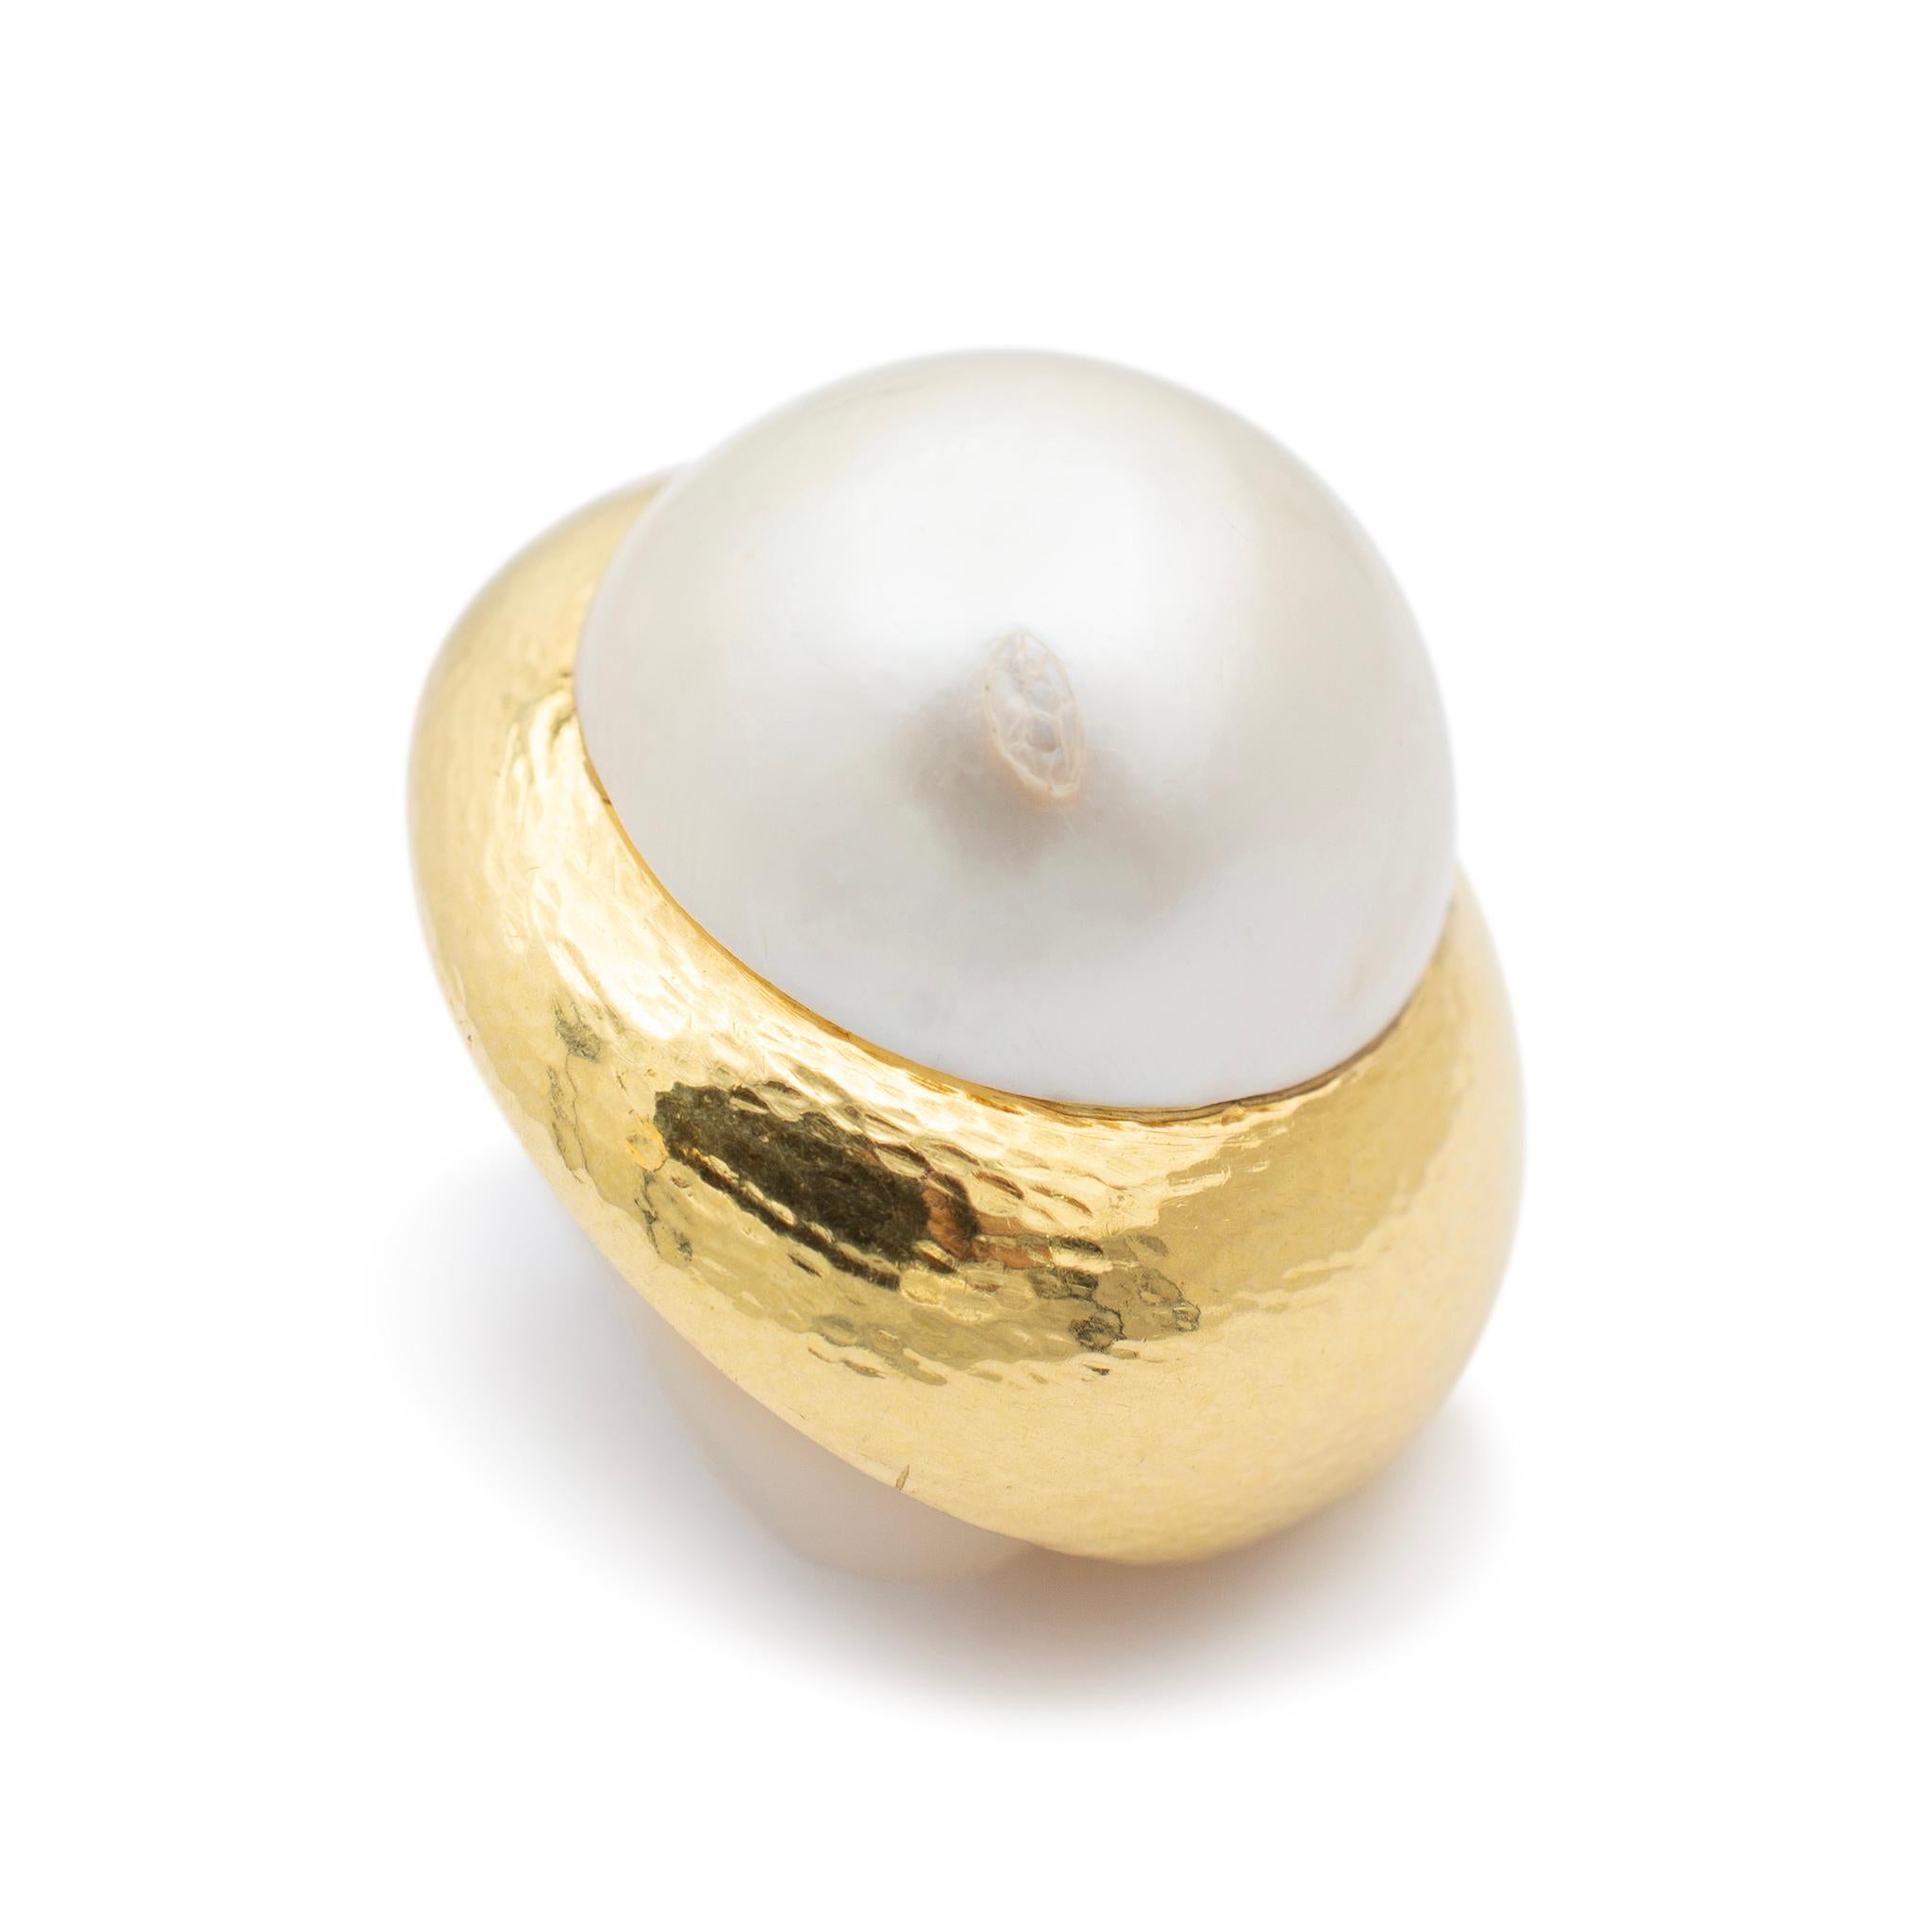 Brand: David Webb

Gender: Ladies

Metal Type: 18K Yellow & White Gold

Diameter: 1.00 Inches

Weight: 40.41 grams

Ladies 18K white & yellow gold pearl clip-on stud earrings. Engraved with 